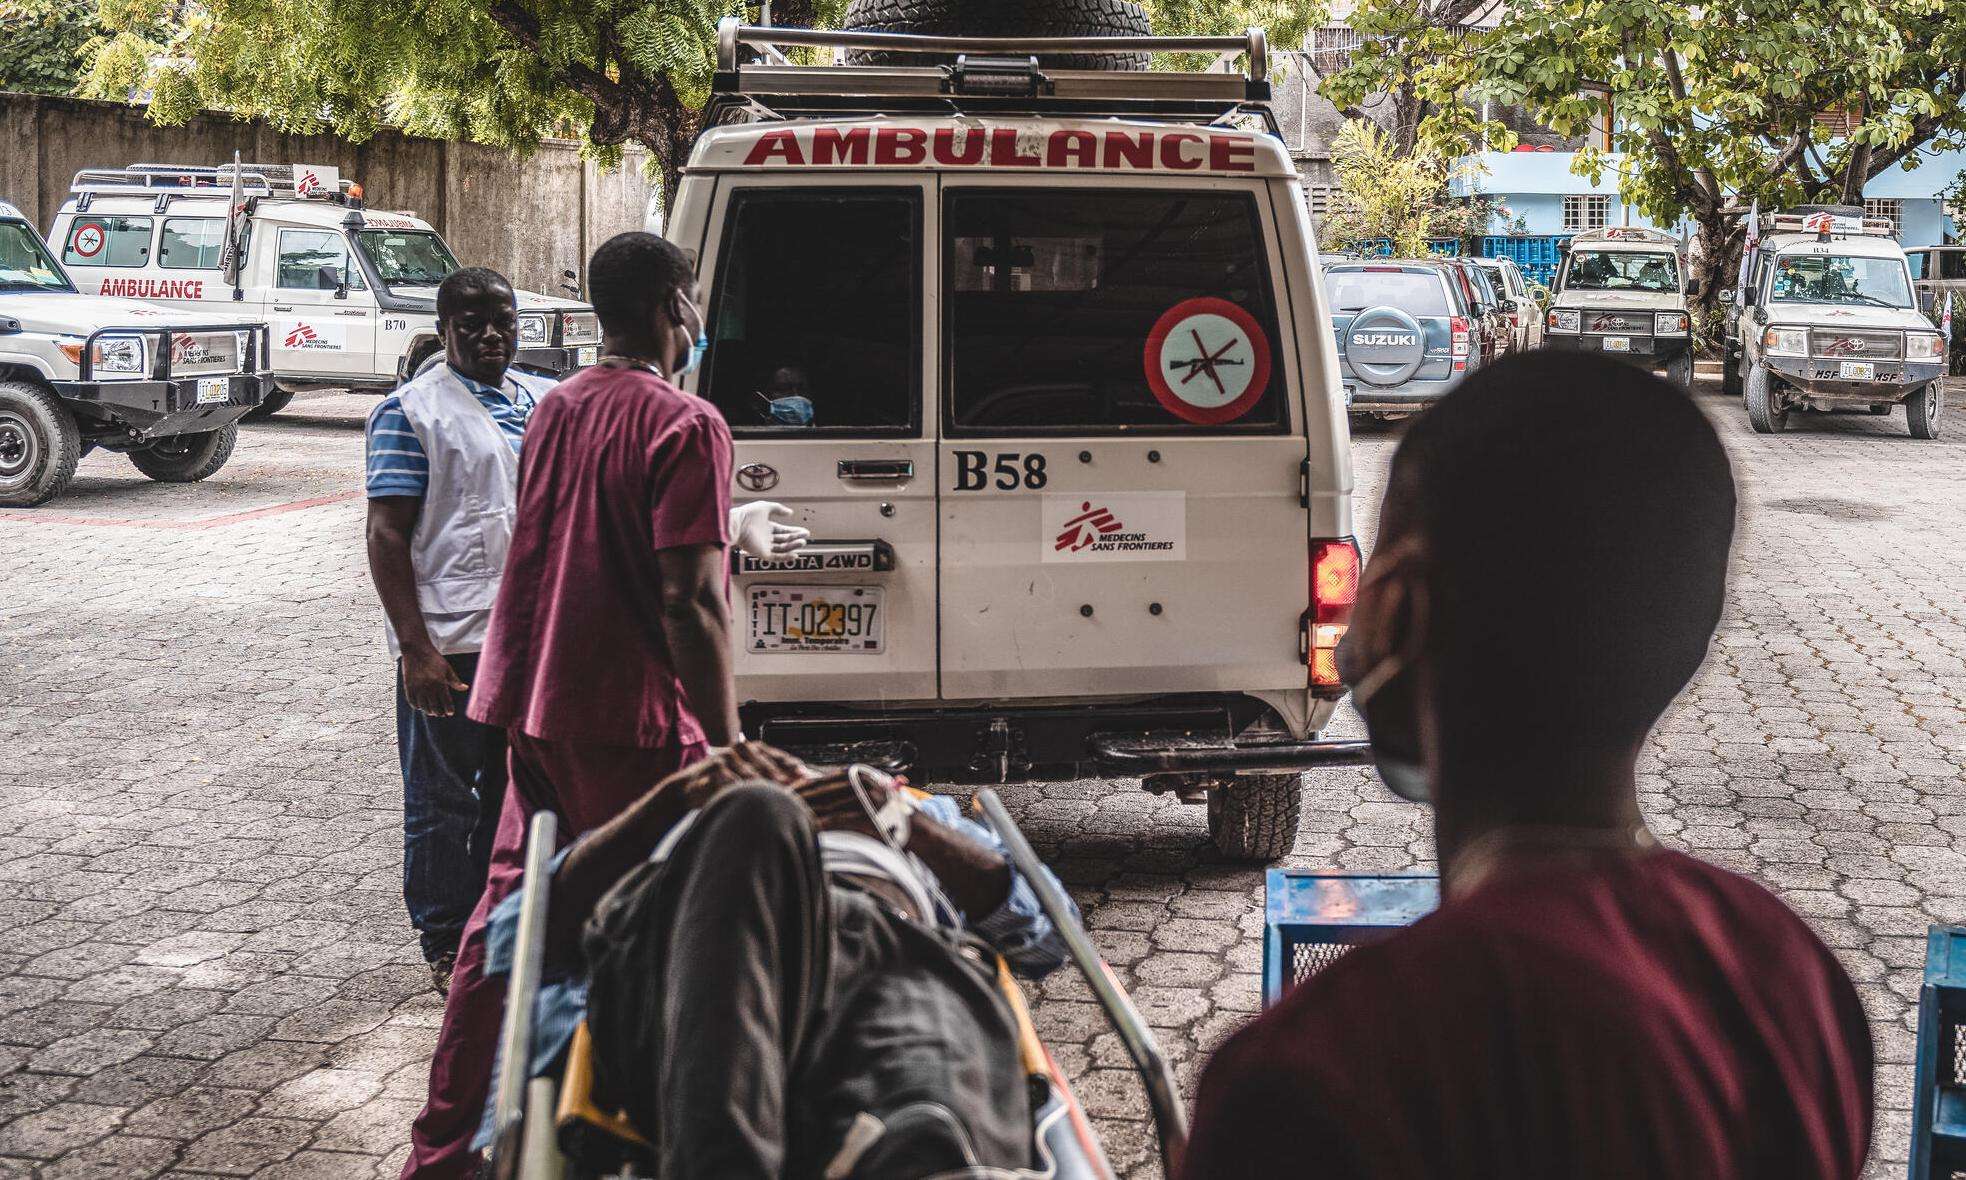 Staff load a patient onto an ambulance at MSF's Turgeau Emergency Center in Port-au-Prince, Haiti